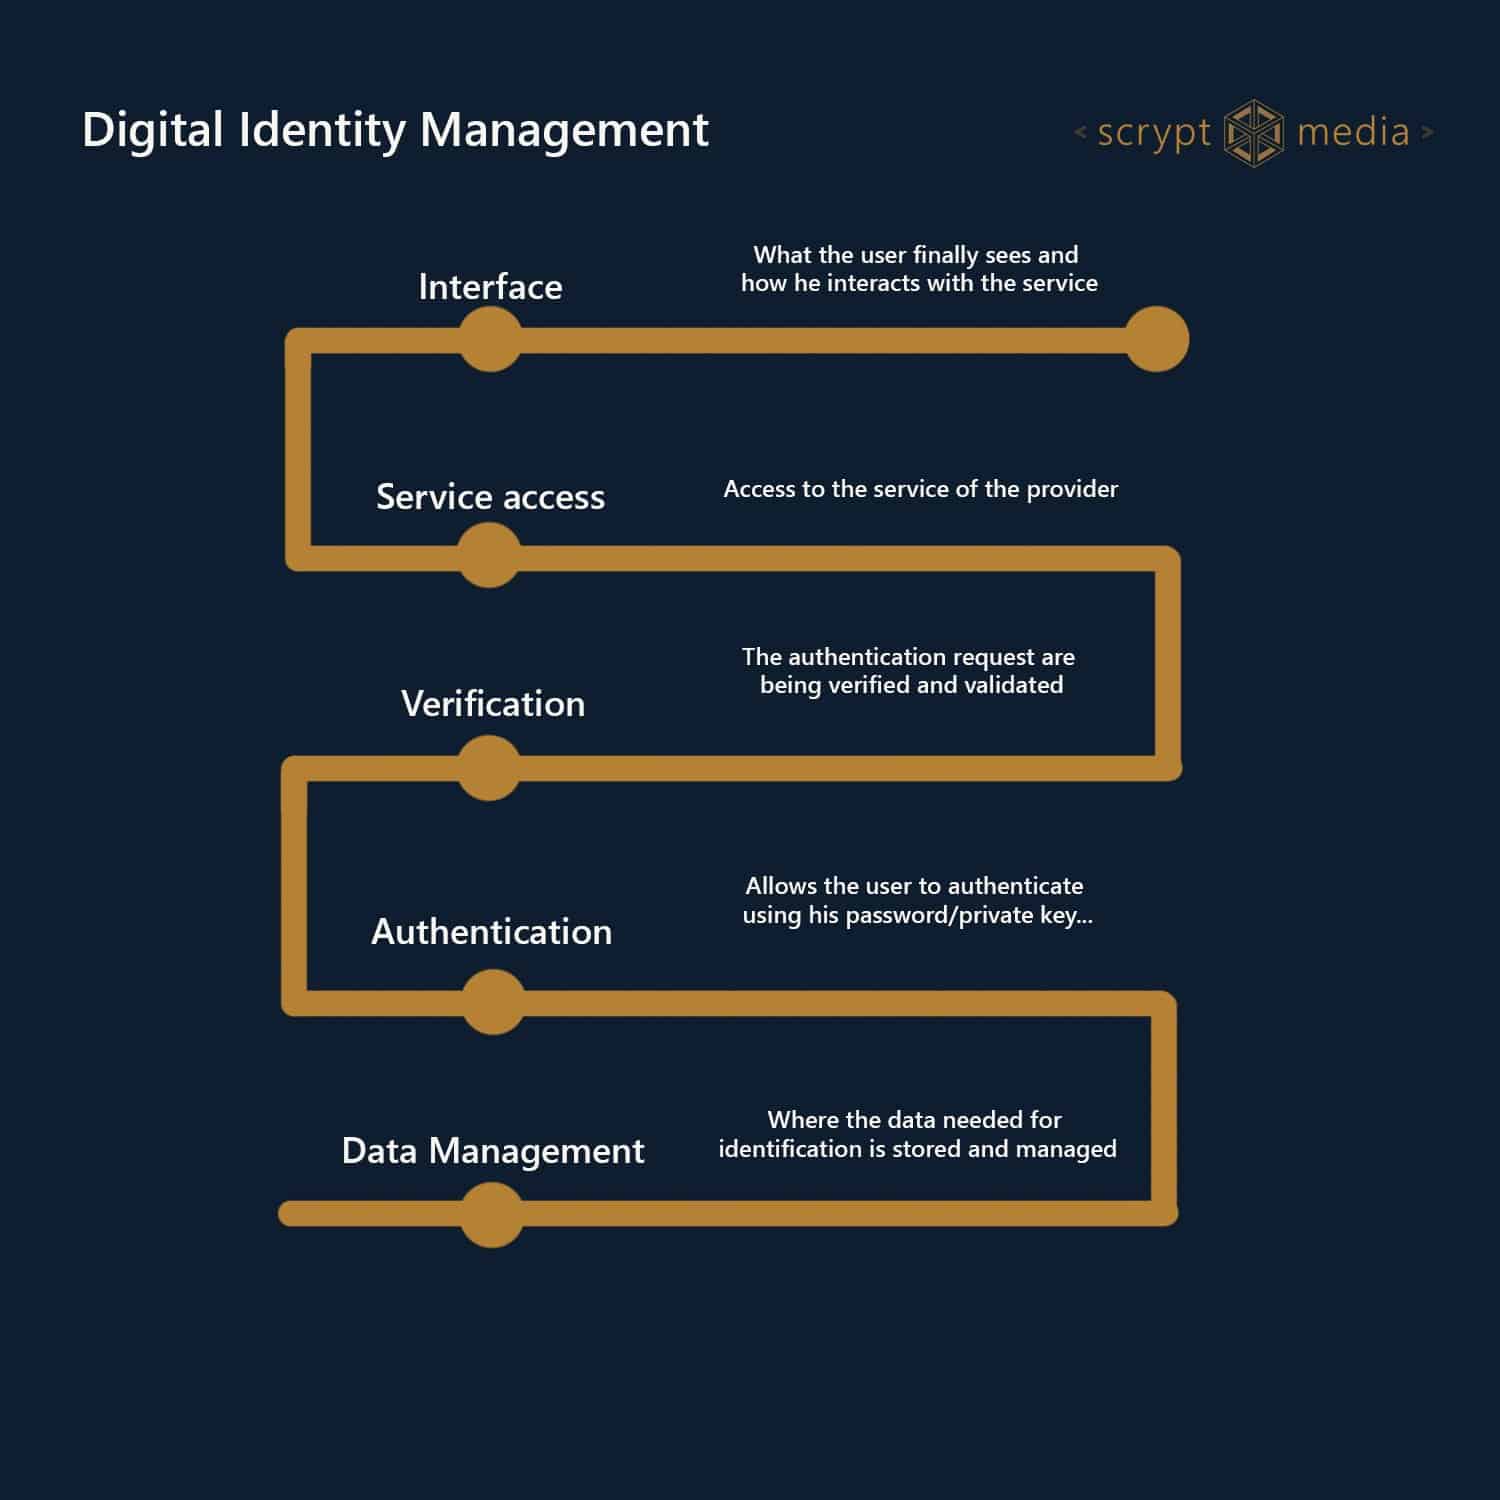 The levels of Digital Identity Management